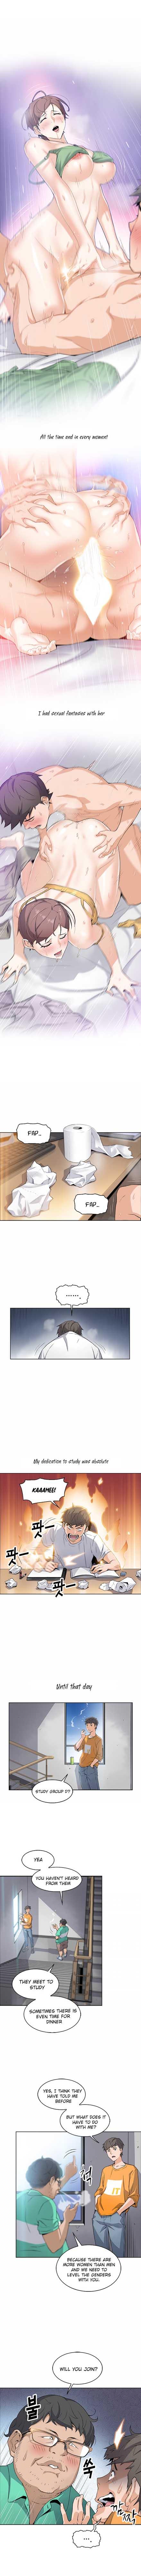 Housekeeper [Neck Pillow, Paper] Ch.49/49 [English] [Manhwa PDF] Completed 8